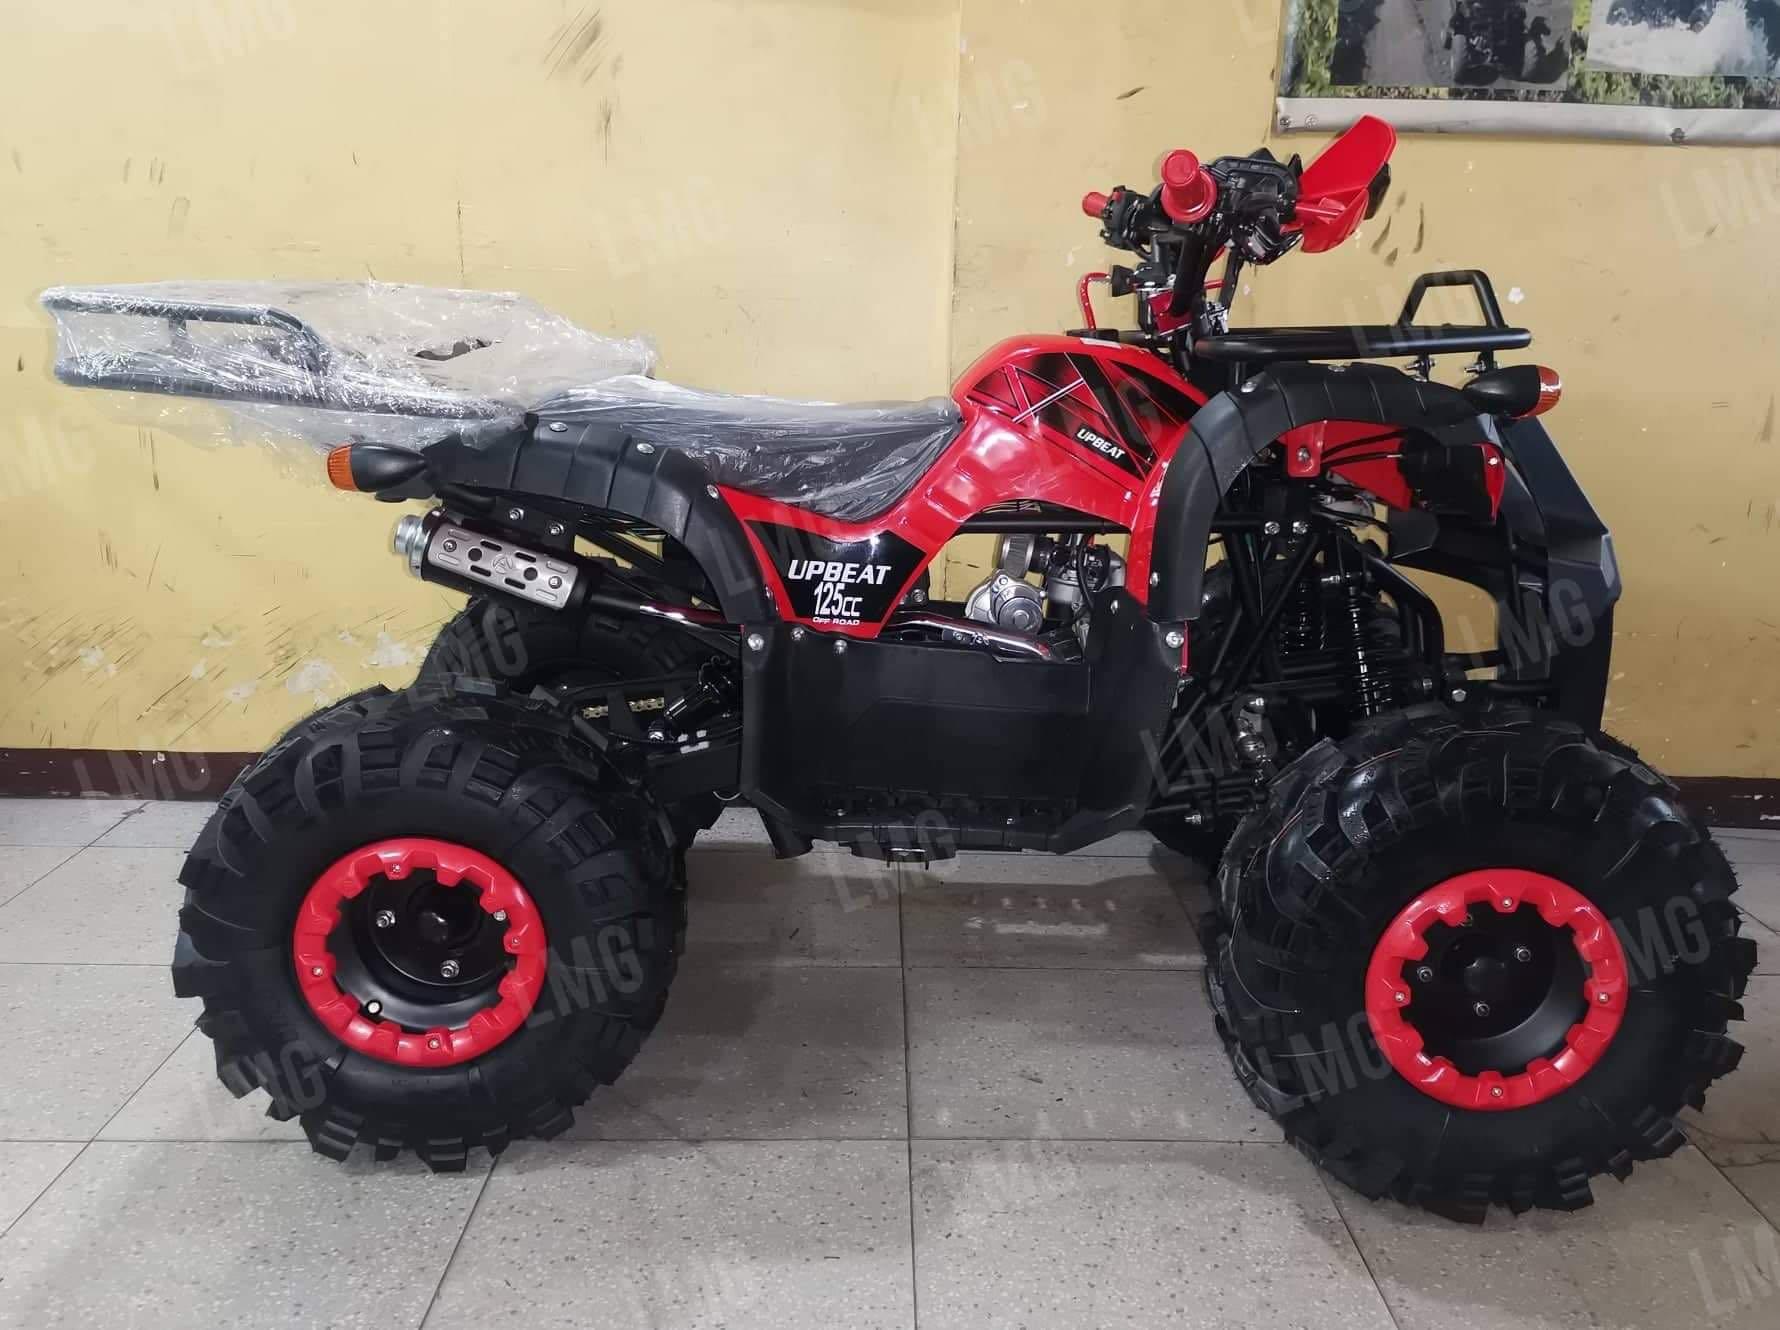 ATV Lifan 125cc Big Tires NEW Arrival, Motorbikes, Motorbikes for Sale on  Carousell